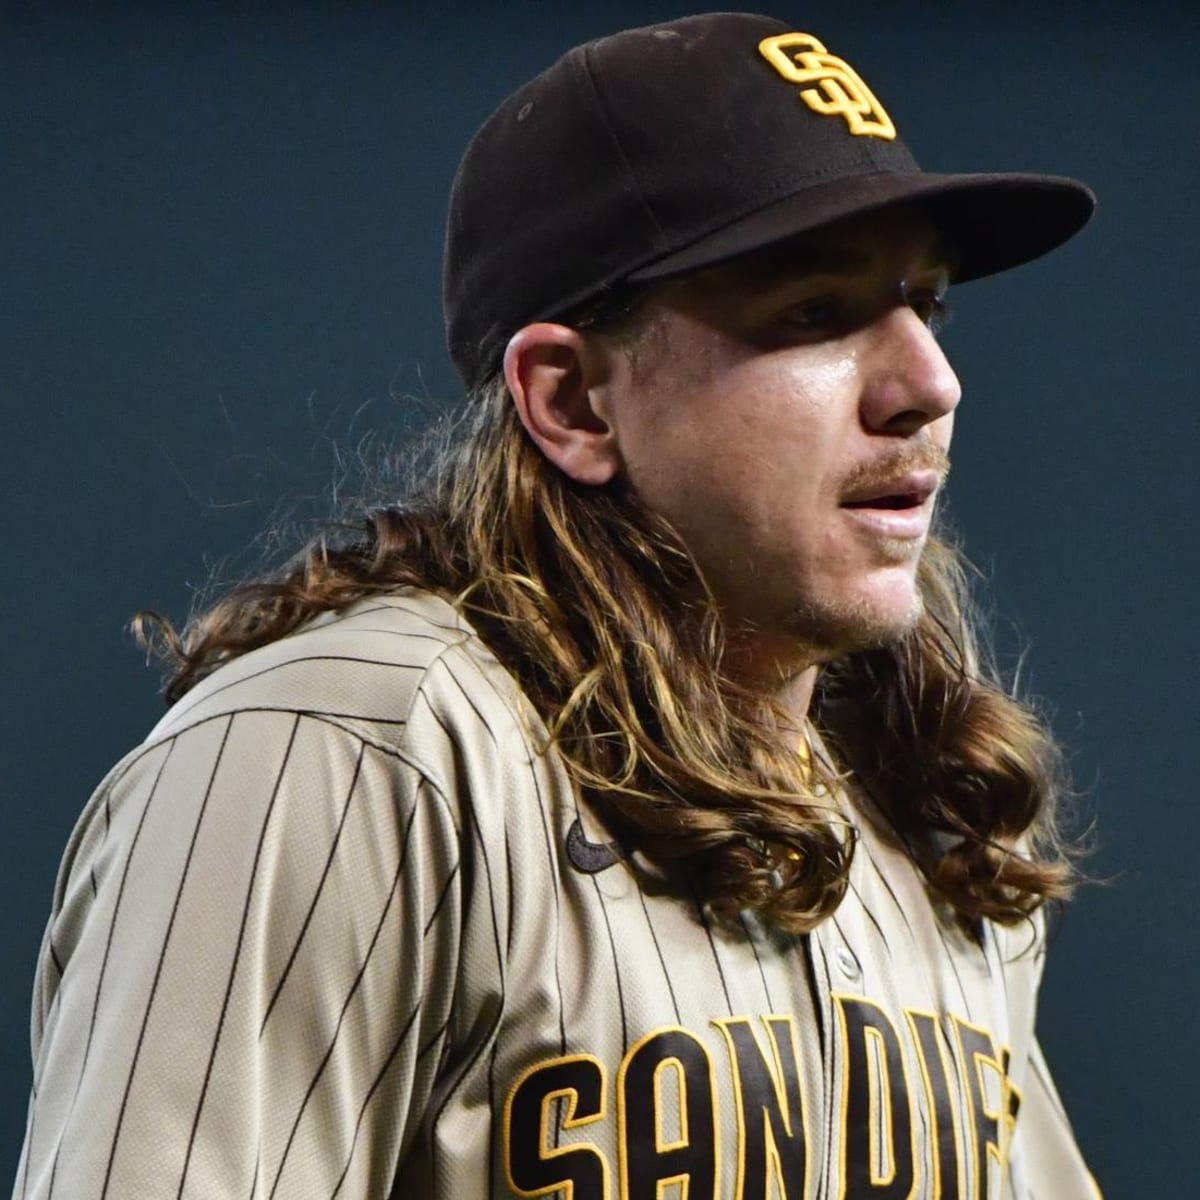 Mike Clevinger did not hold back after a Twitter user criticized his long  hair